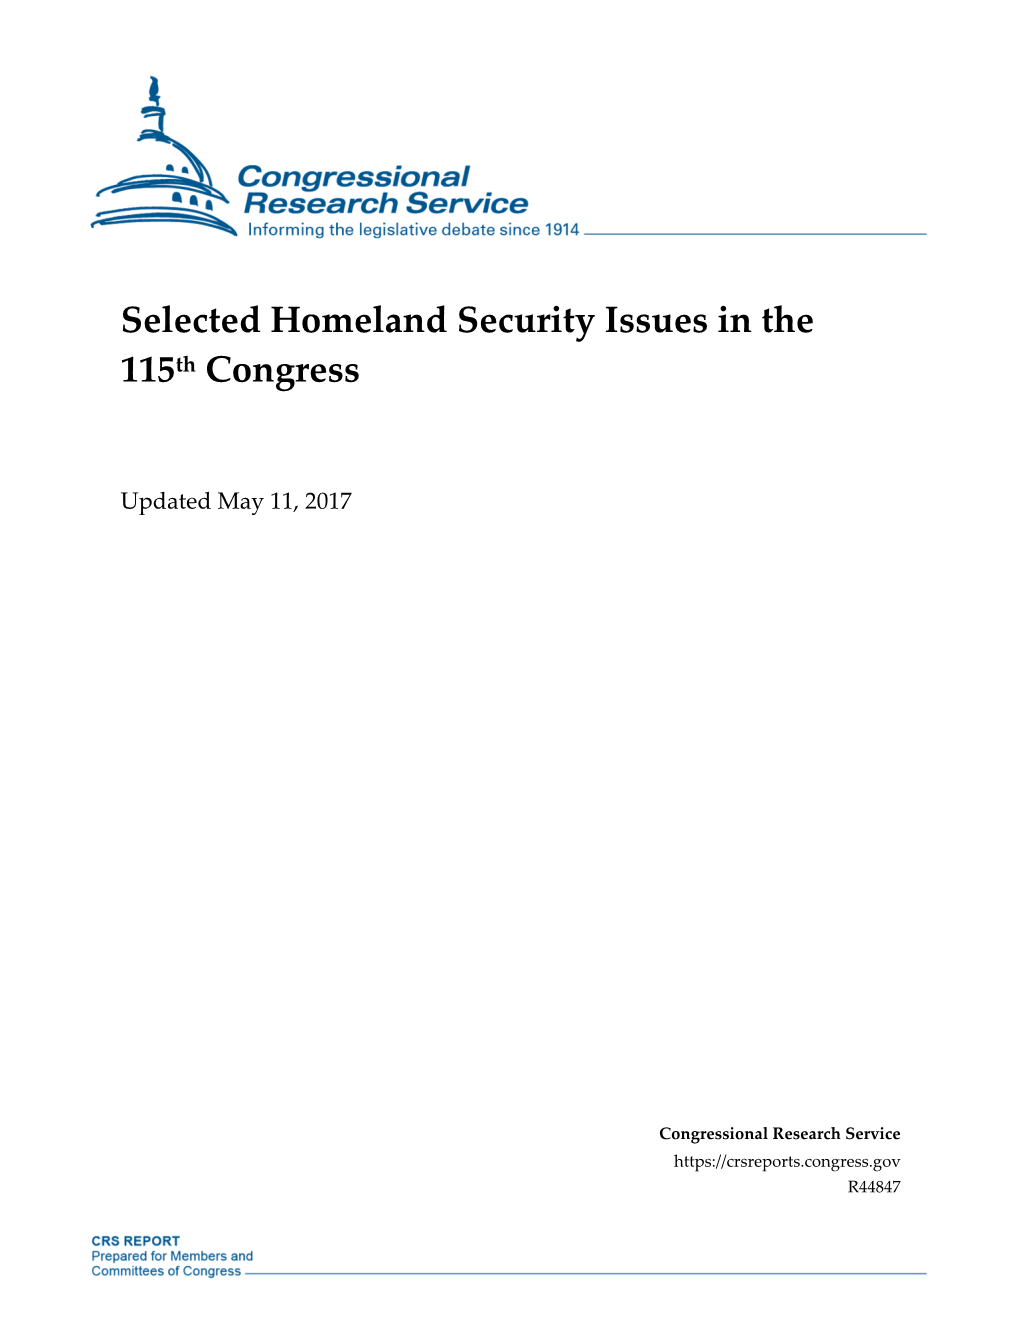 Selected Homeland Security Issues in the 115Th Congress